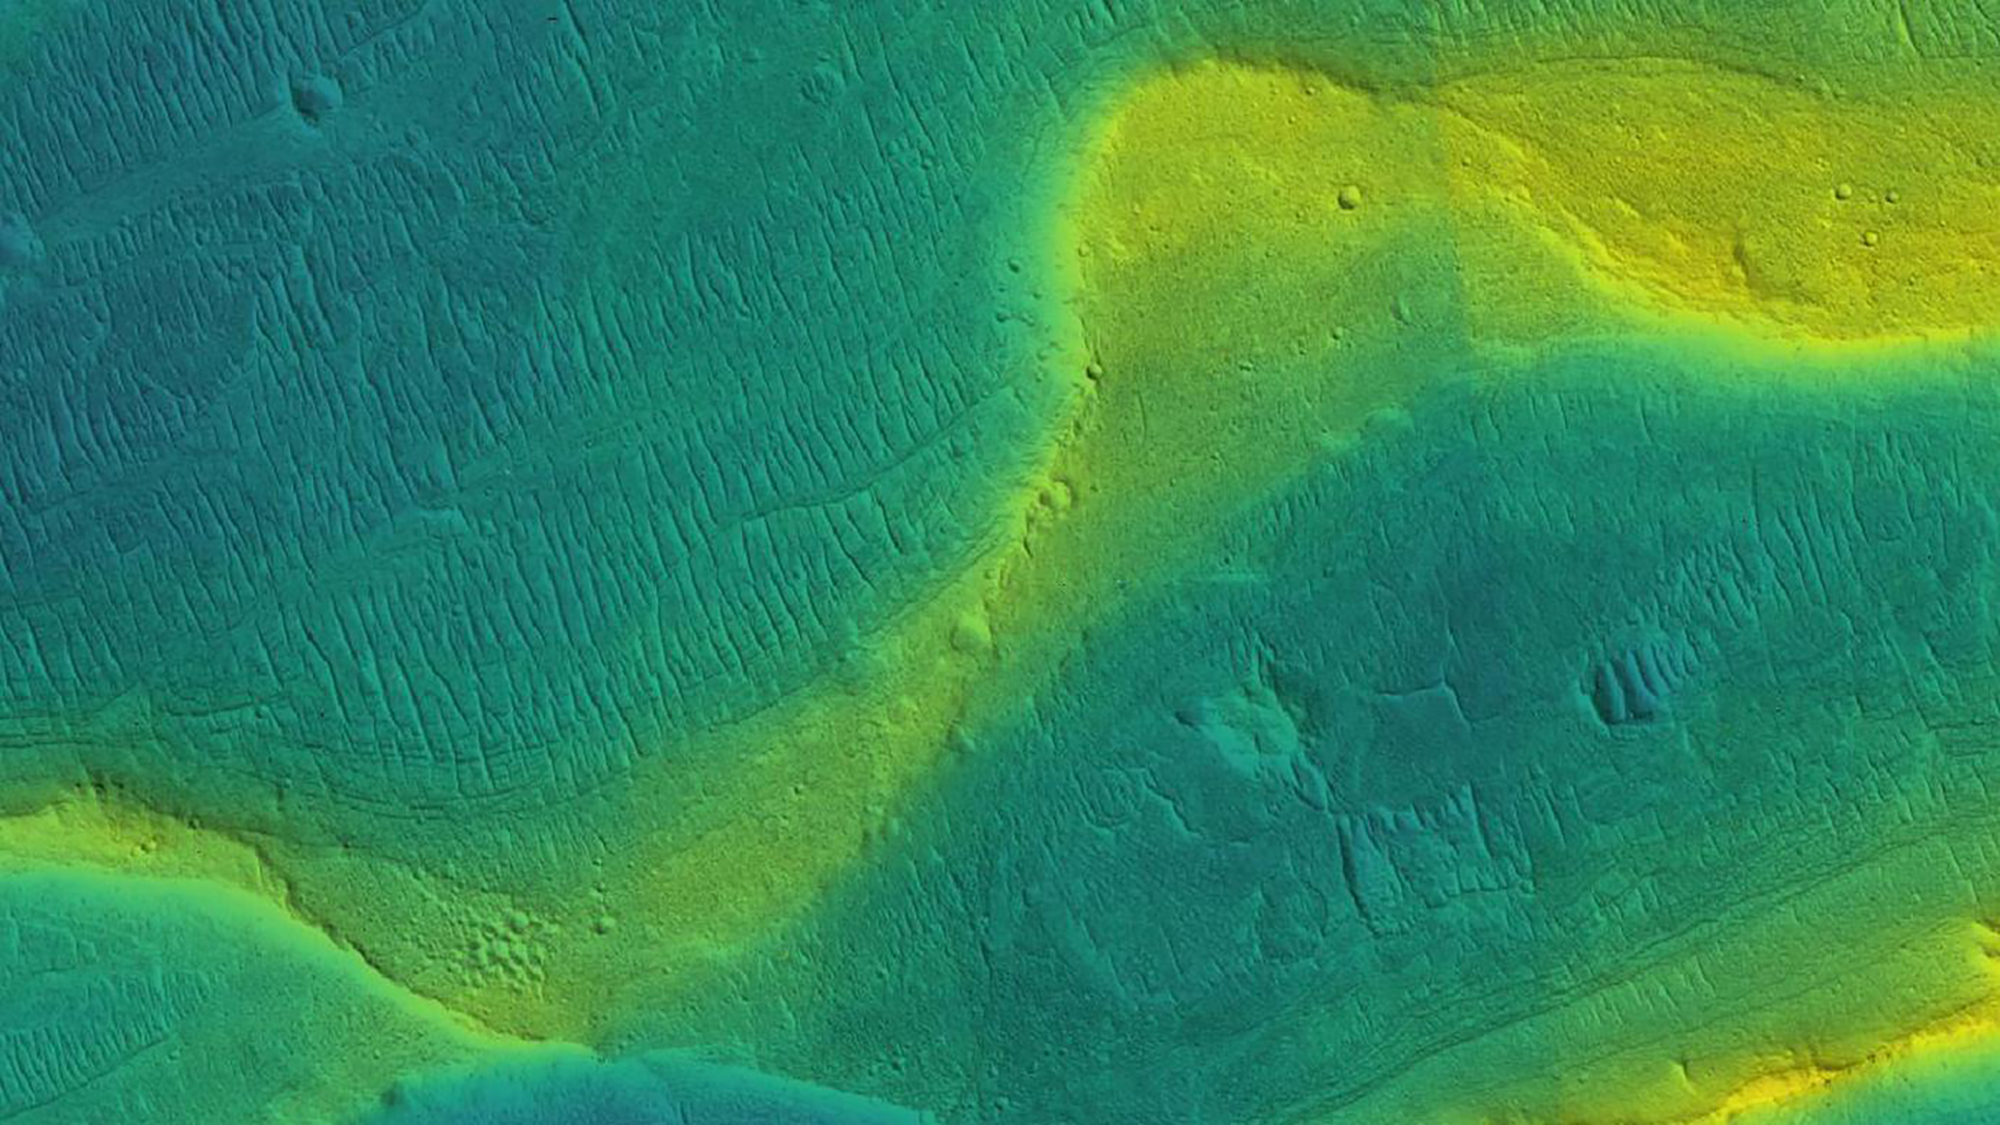 Preserved river channel on Mars